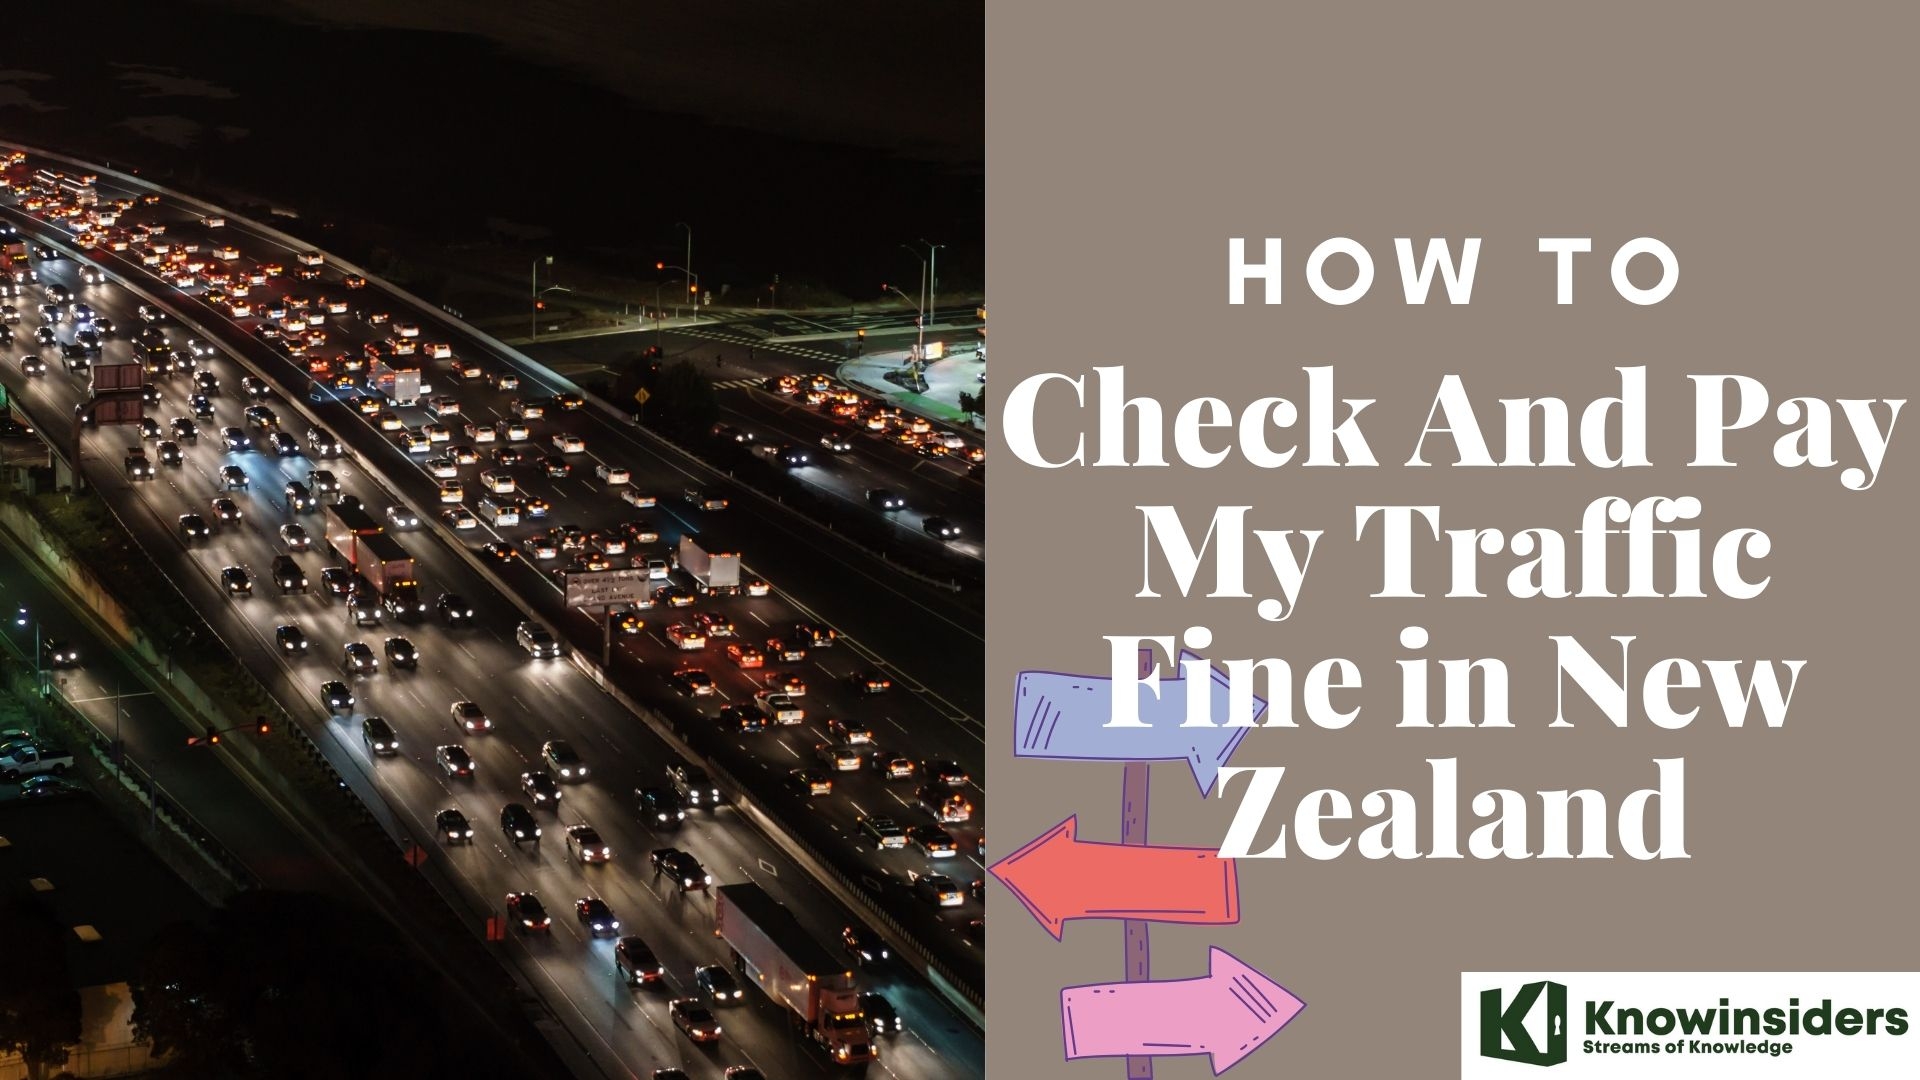 How To Check And Pay My Traffic Fine in New Zealand